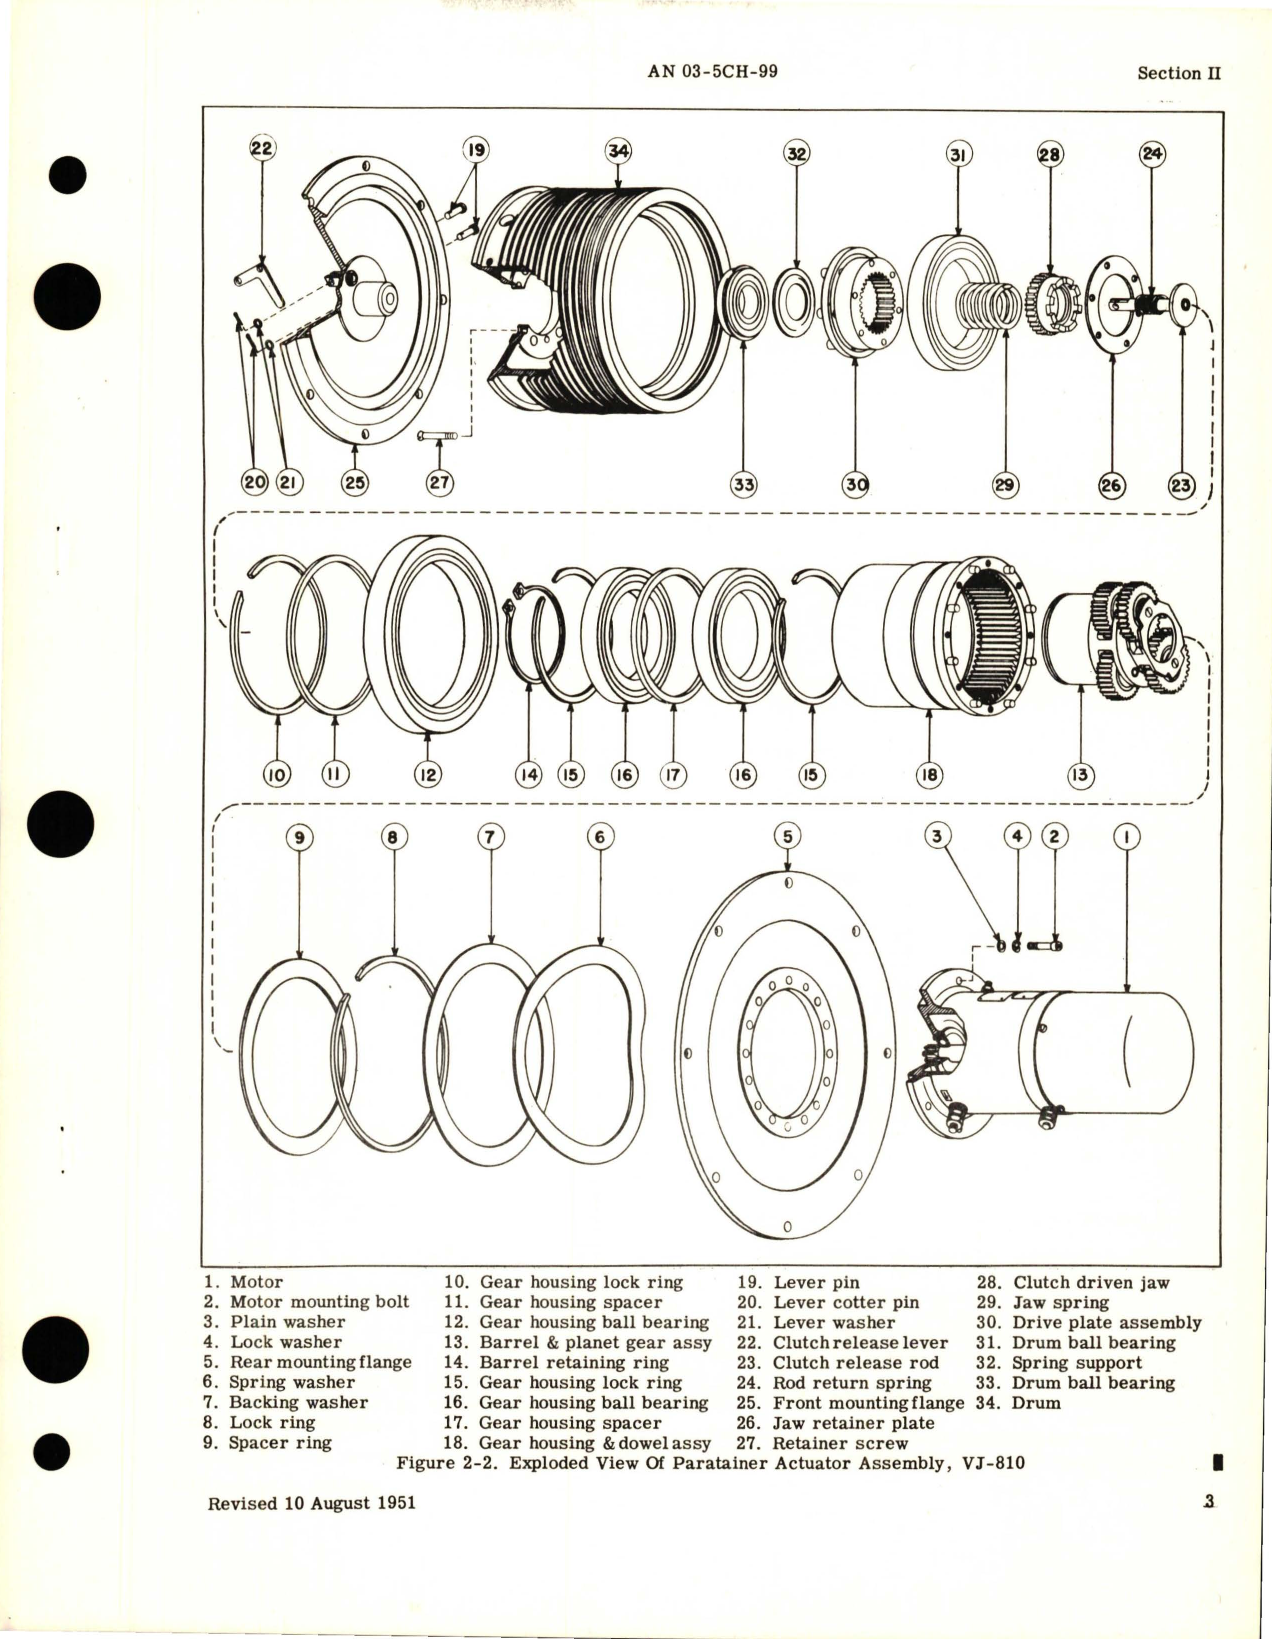 Sample page 5 from AirCorps Library document: Overhaul Instructions for Paratainer Actuator - Part VJ-810